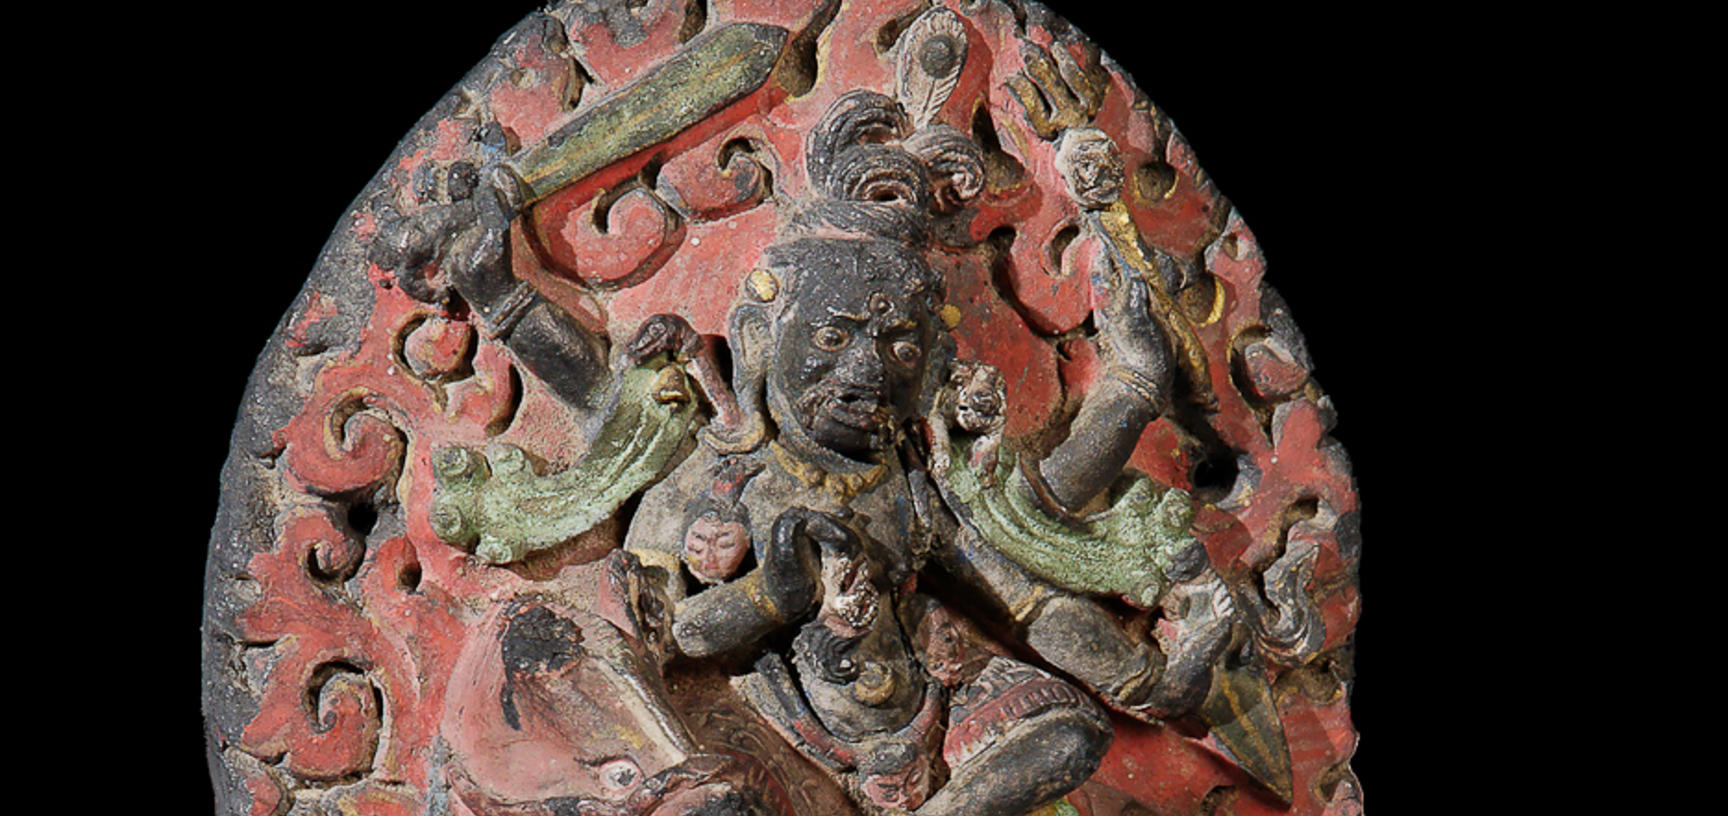 Votive object (Tibetan: tsa-tsa) depicting Palden Lhamo. Acquired by Augustus Pitt-Rivers before 1884 and donated as part of the Pitt Rivers Museum founding collection.